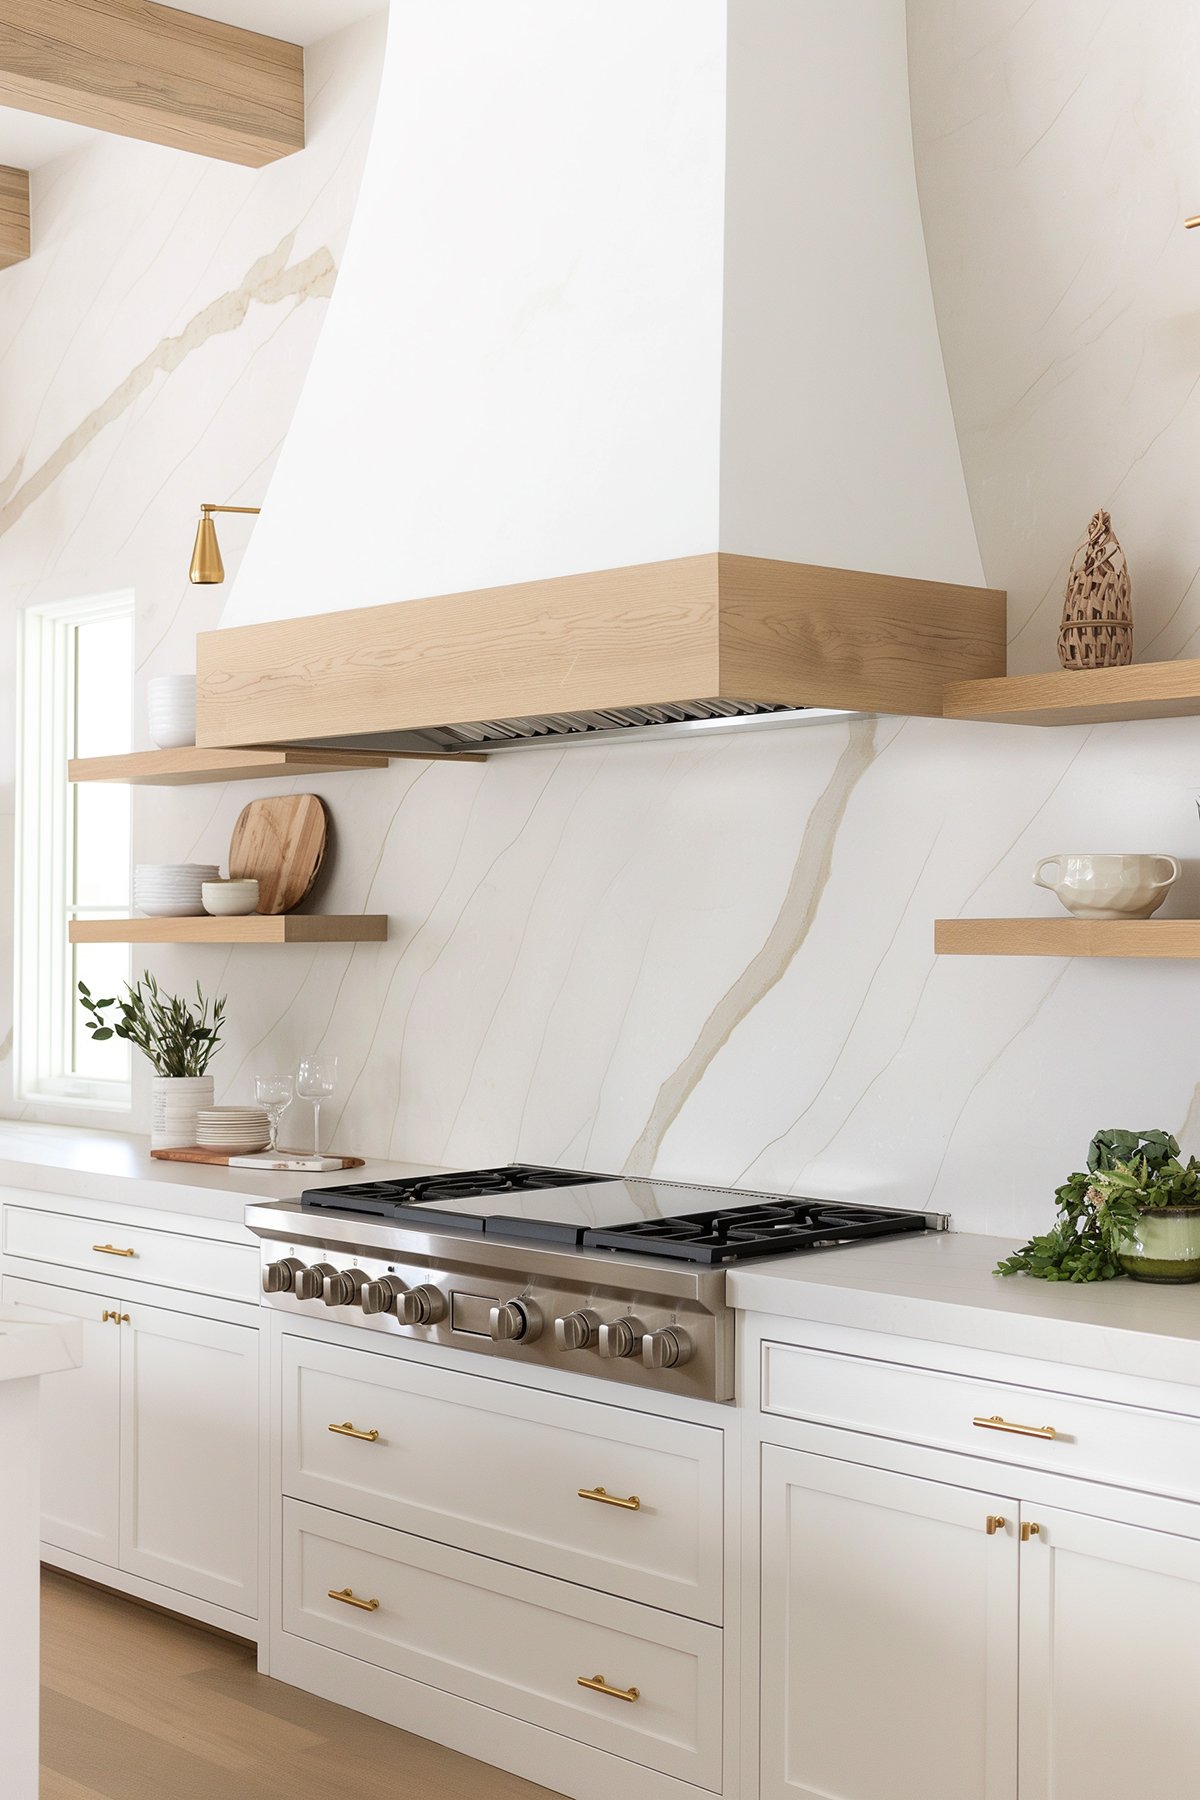 Large white plaster hood with a wood band, a slab marble backsplash and white cabinets.